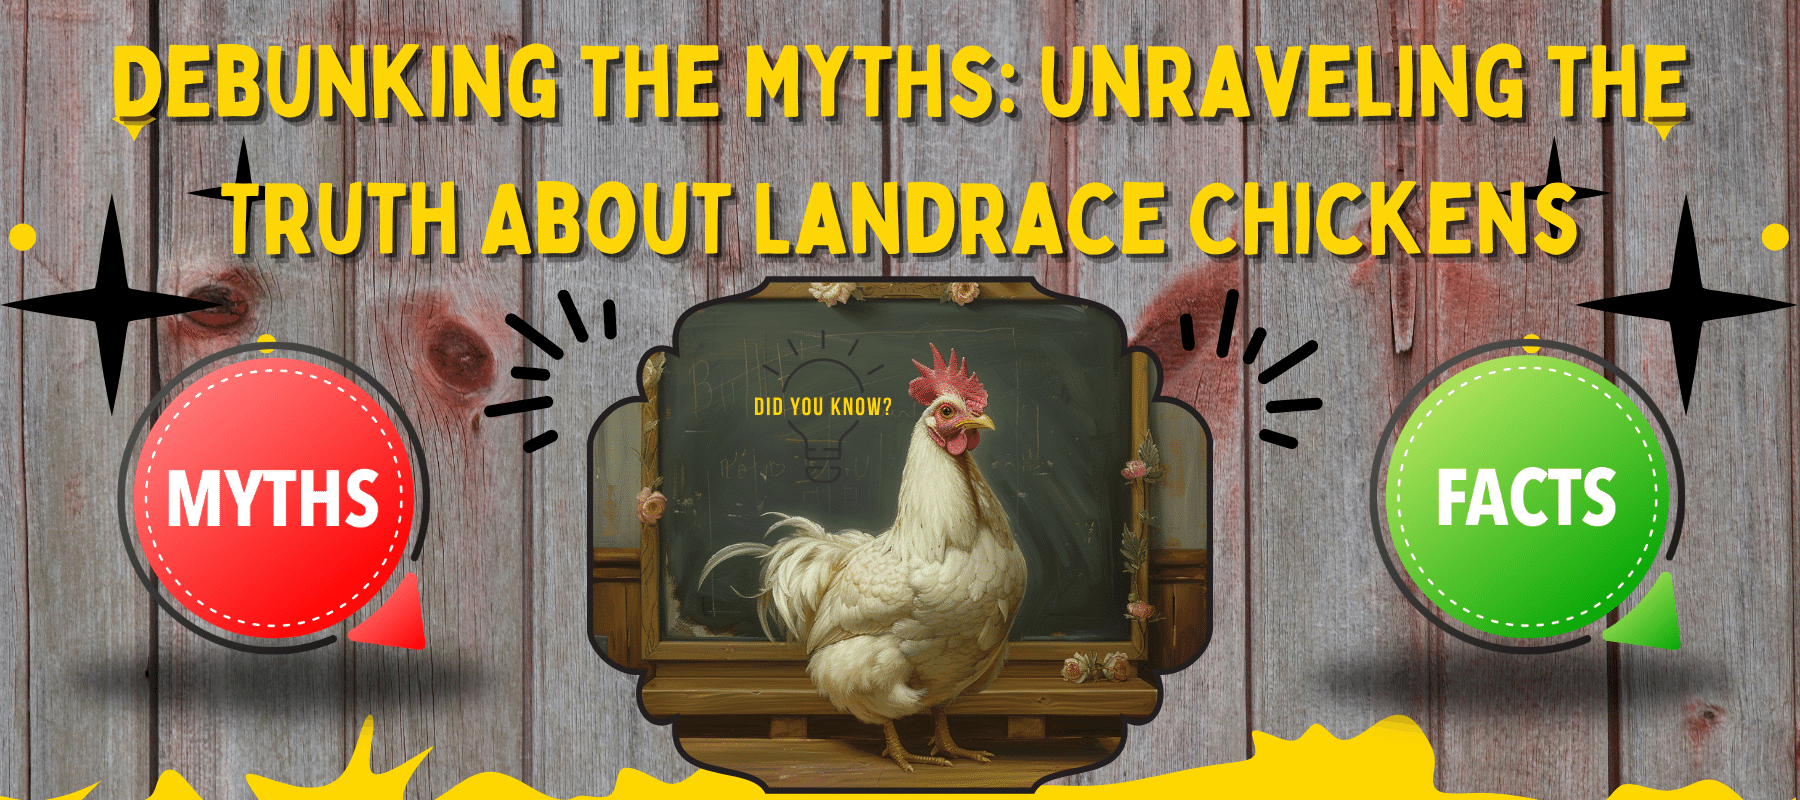 Debunking the Myths: Unraveling the Truth About Landrace Chickens